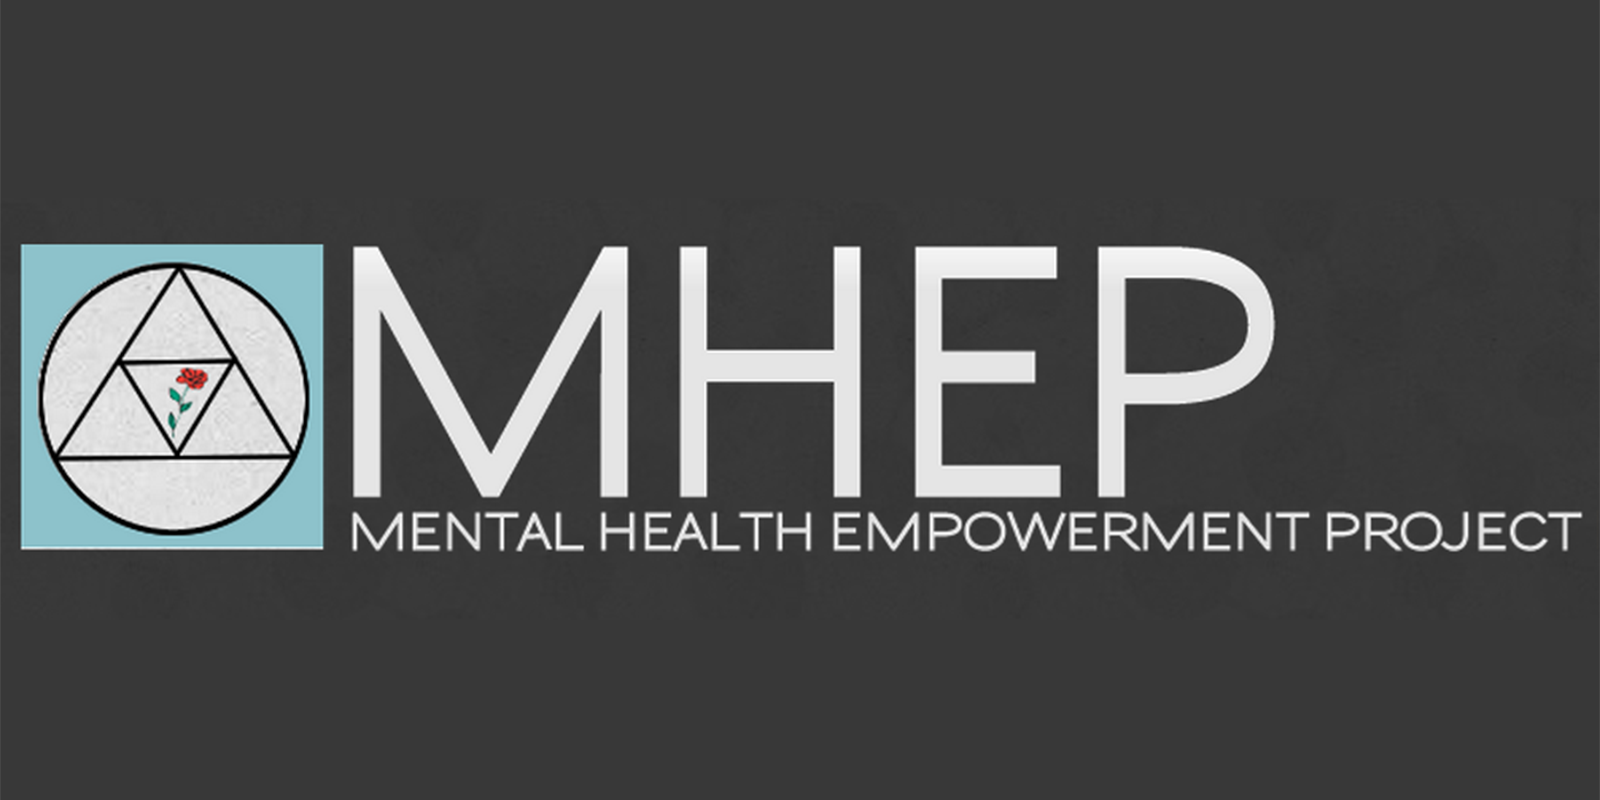 PEER SUPPORT: Mental Health Empowerment Project